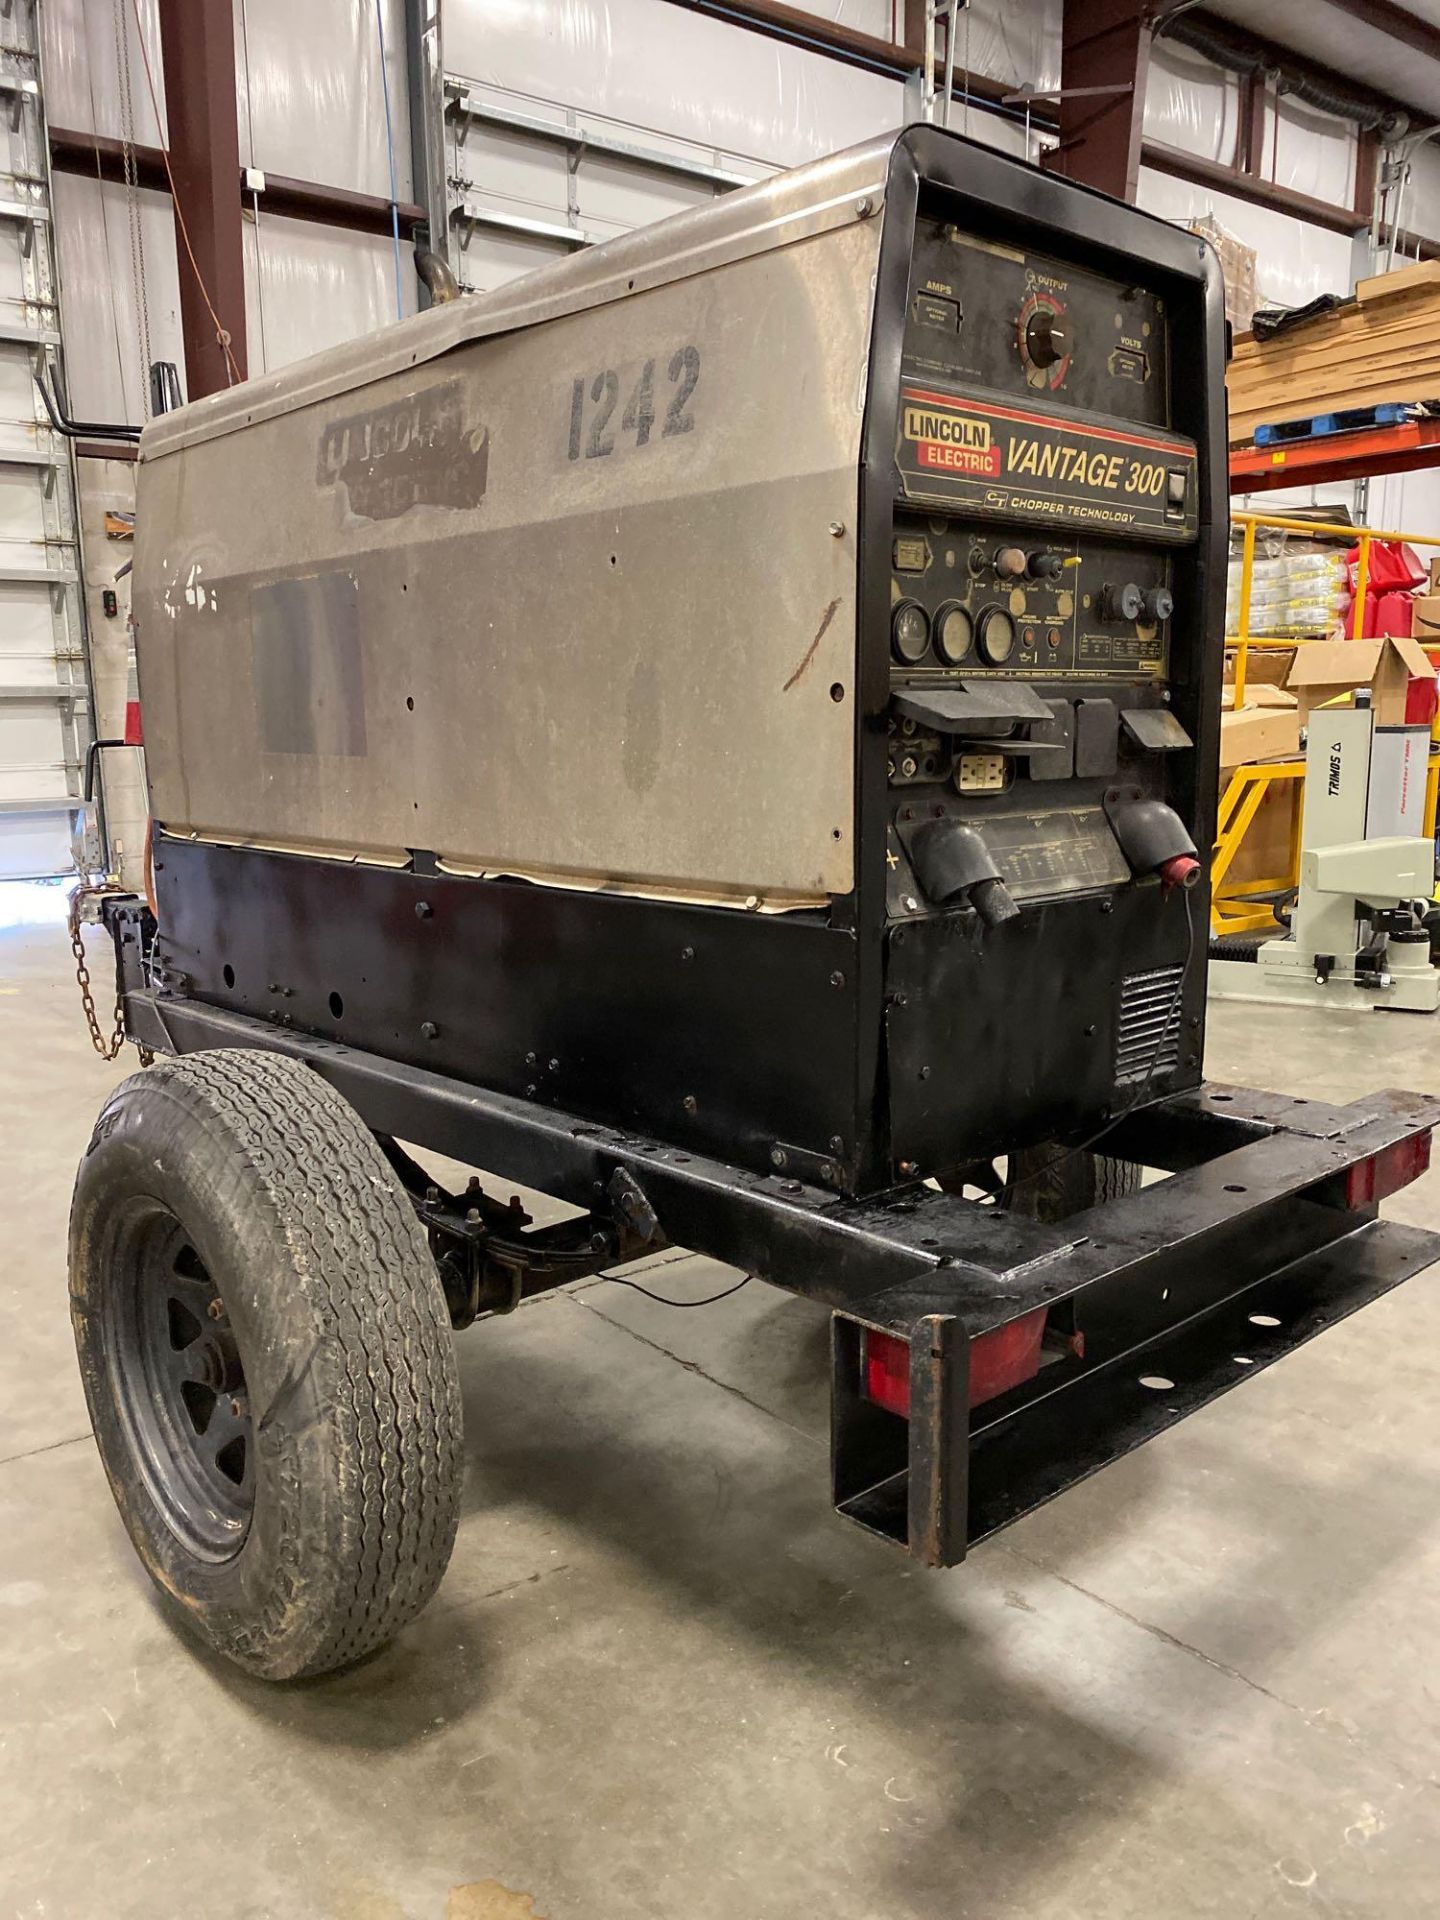 2010 LINCOLN ELECTRIC VANTAGE 300 WELDER/GENERATOR, TRAILER MOUNTED, RUNS AND OPERATES - Image 2 of 7